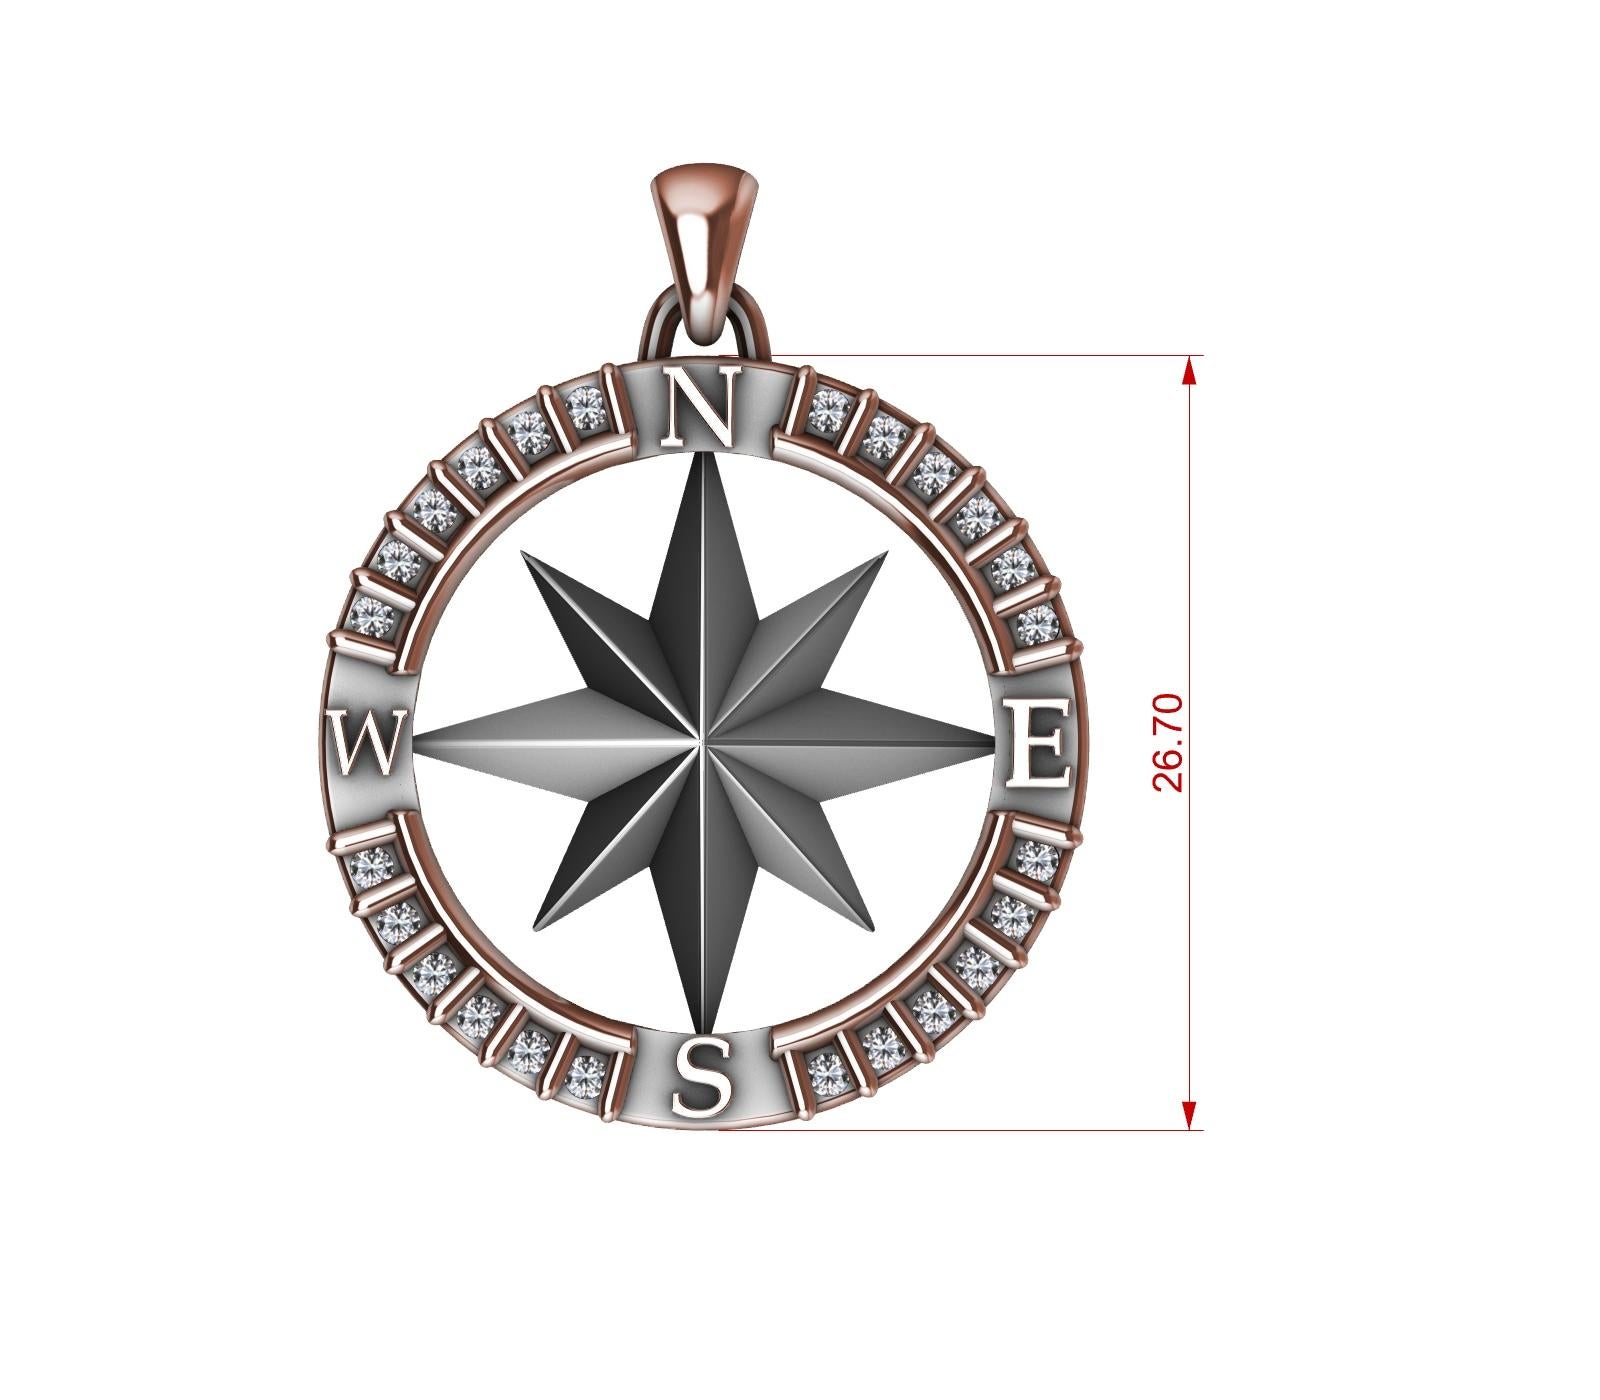  18 Karat Rose Gold  and Sterling  Diamond Sailors Compass Pendant, For you water and wind lovers. Tiffany Designer , Thomas Kurilla has not forgotten you mates. Inspired from antique sailor's compasses. A sailing lover as well. Wear this and you'll